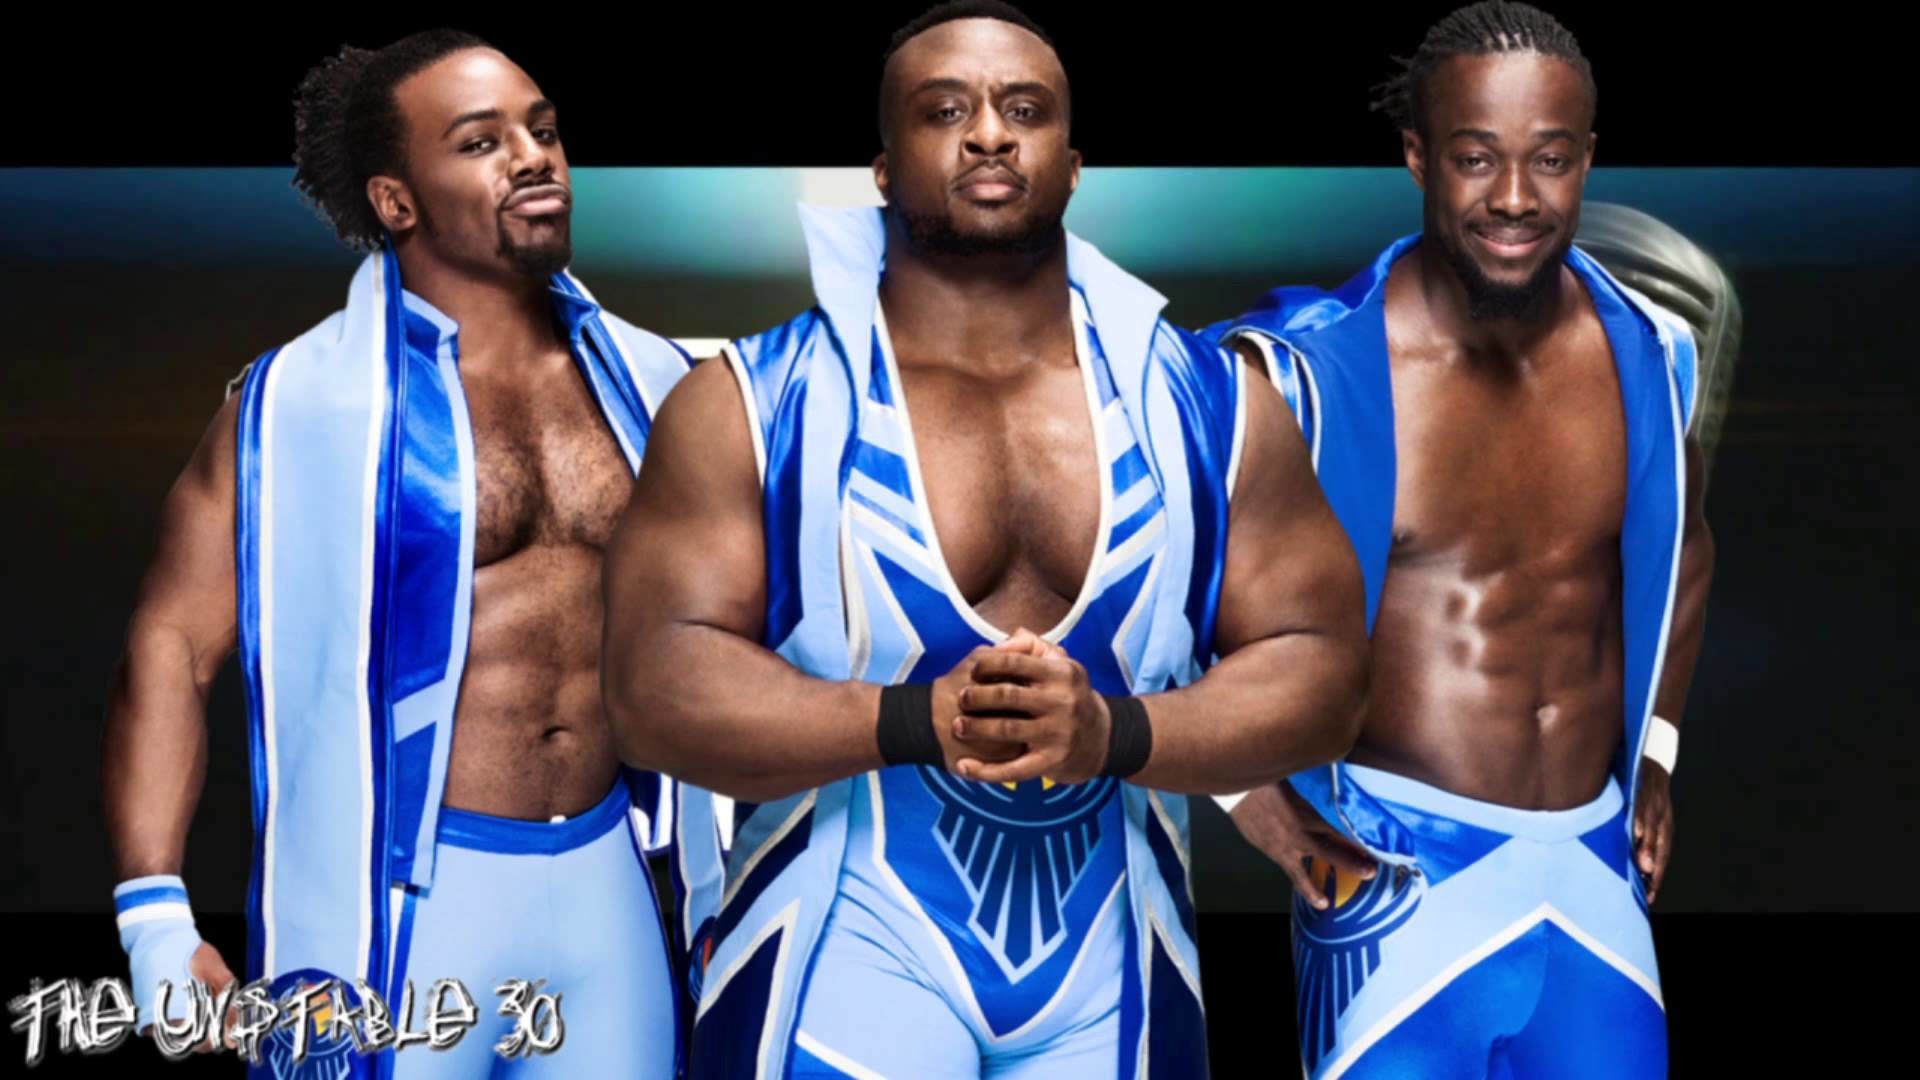 The New Day 2nd Wwe Theme Song For 30 Minutes - Survivor Series 2017 Shield Vs New Day - HD Wallpaper 